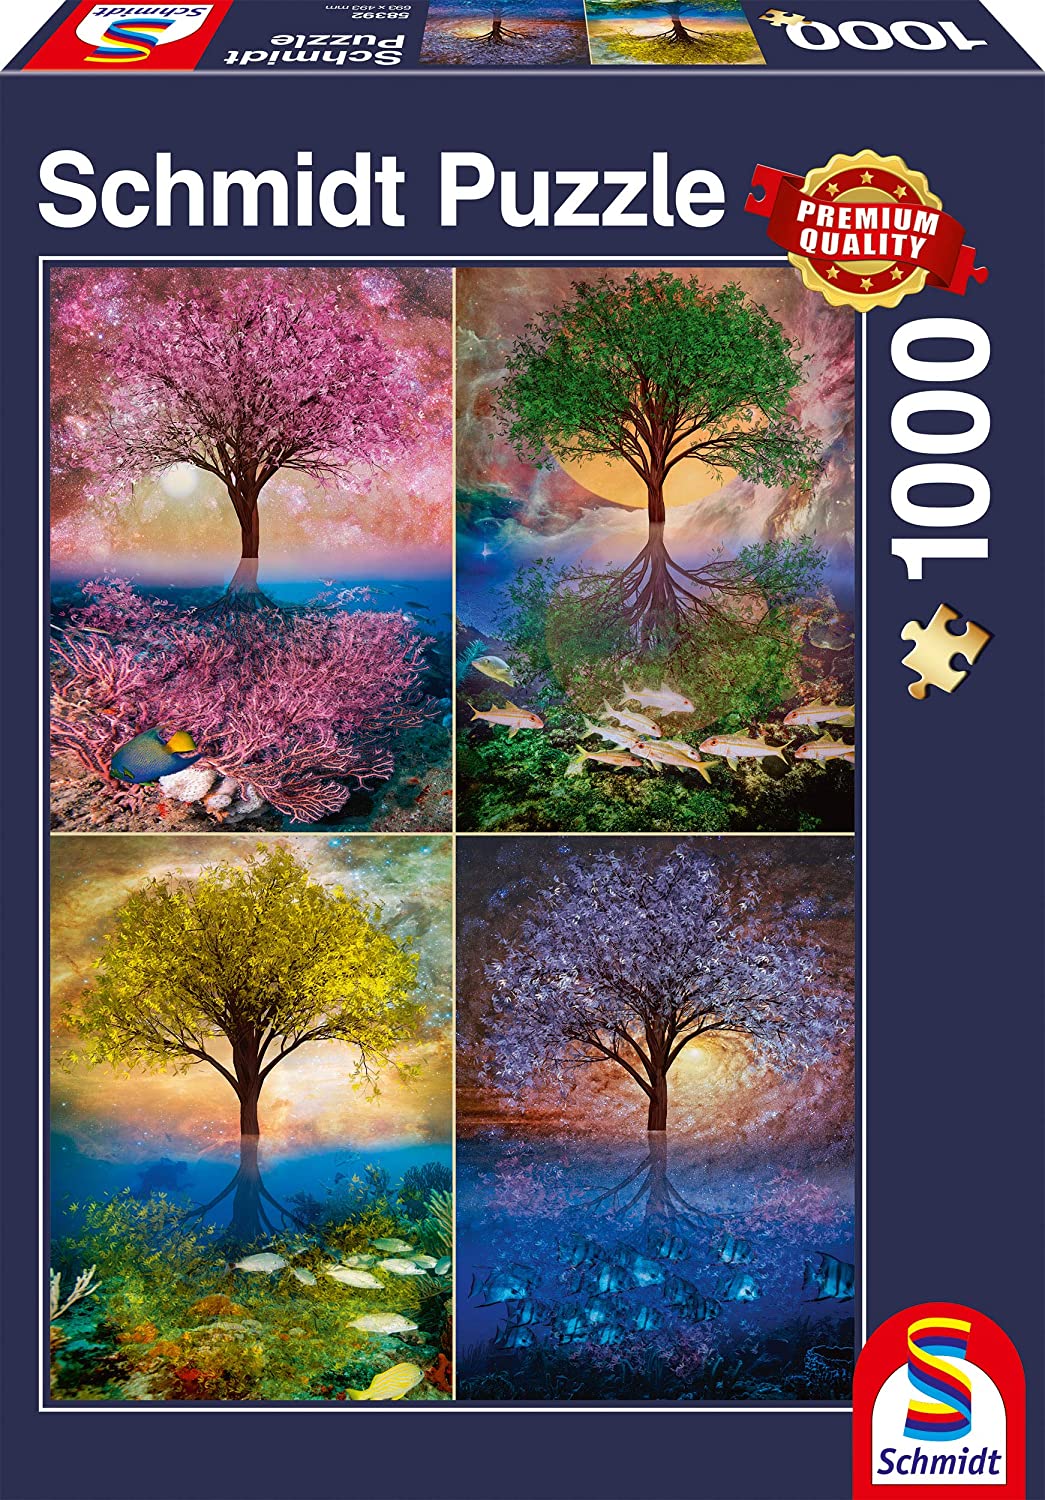 Schmidt Spiele 58392 Magic Tree by The Lake 1000 Piece Jigsaw Puzzle, Colourful